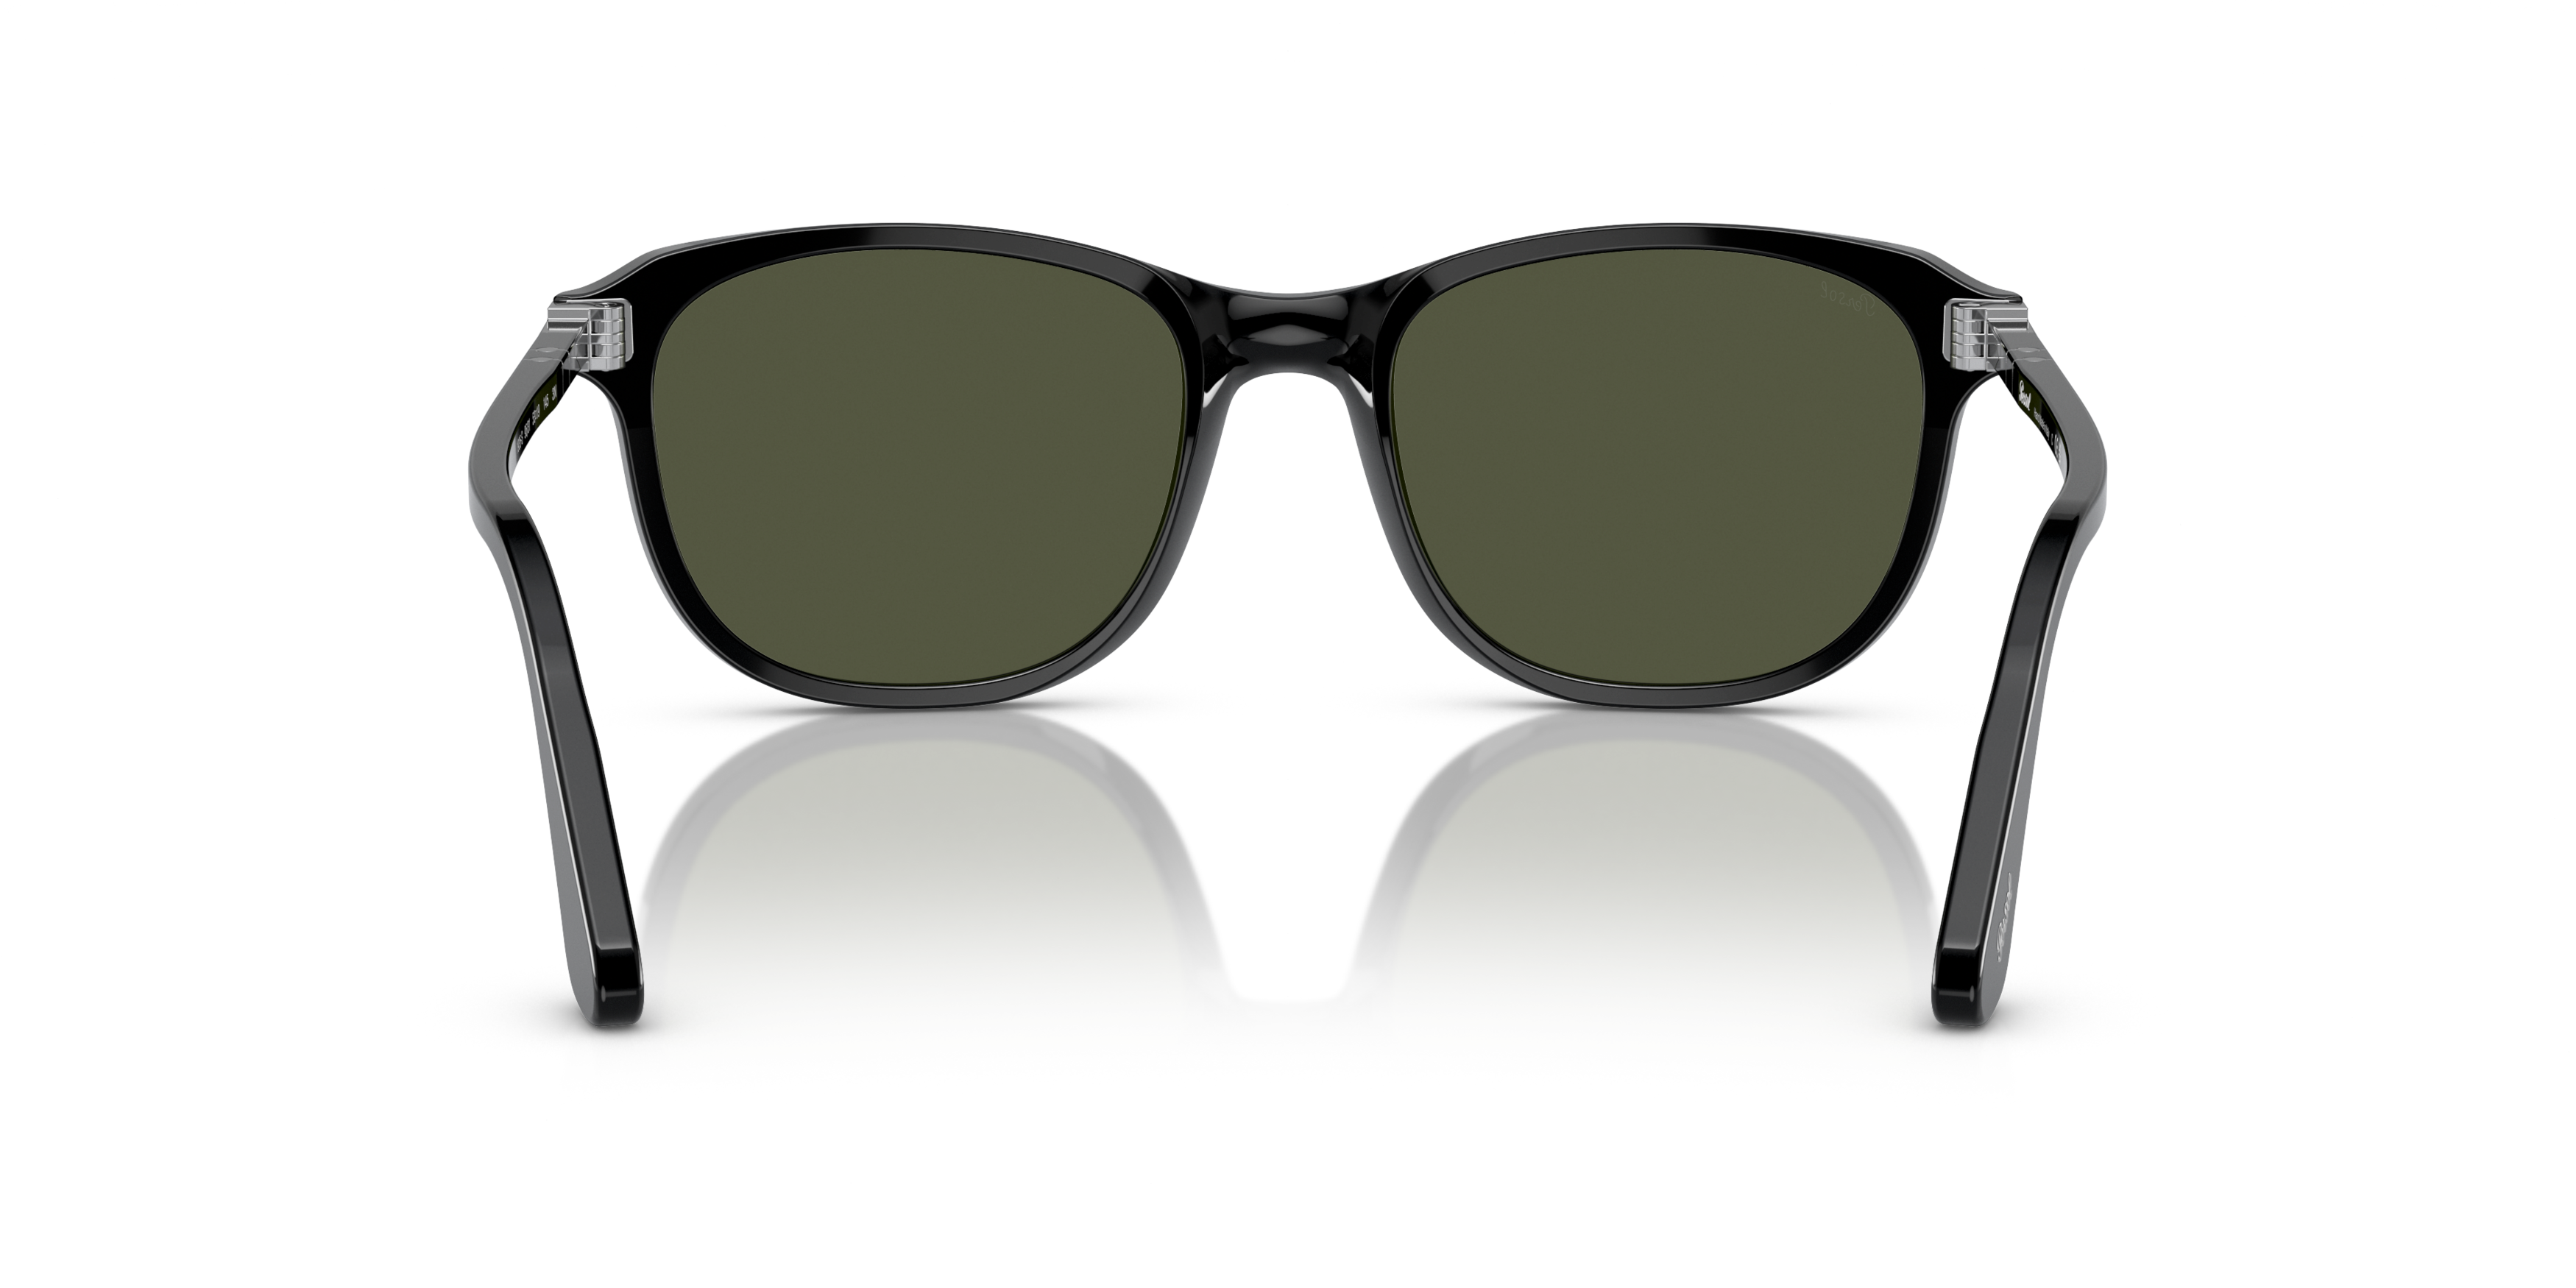 [products.image.detail02] Persol 0PO1935S 95/31